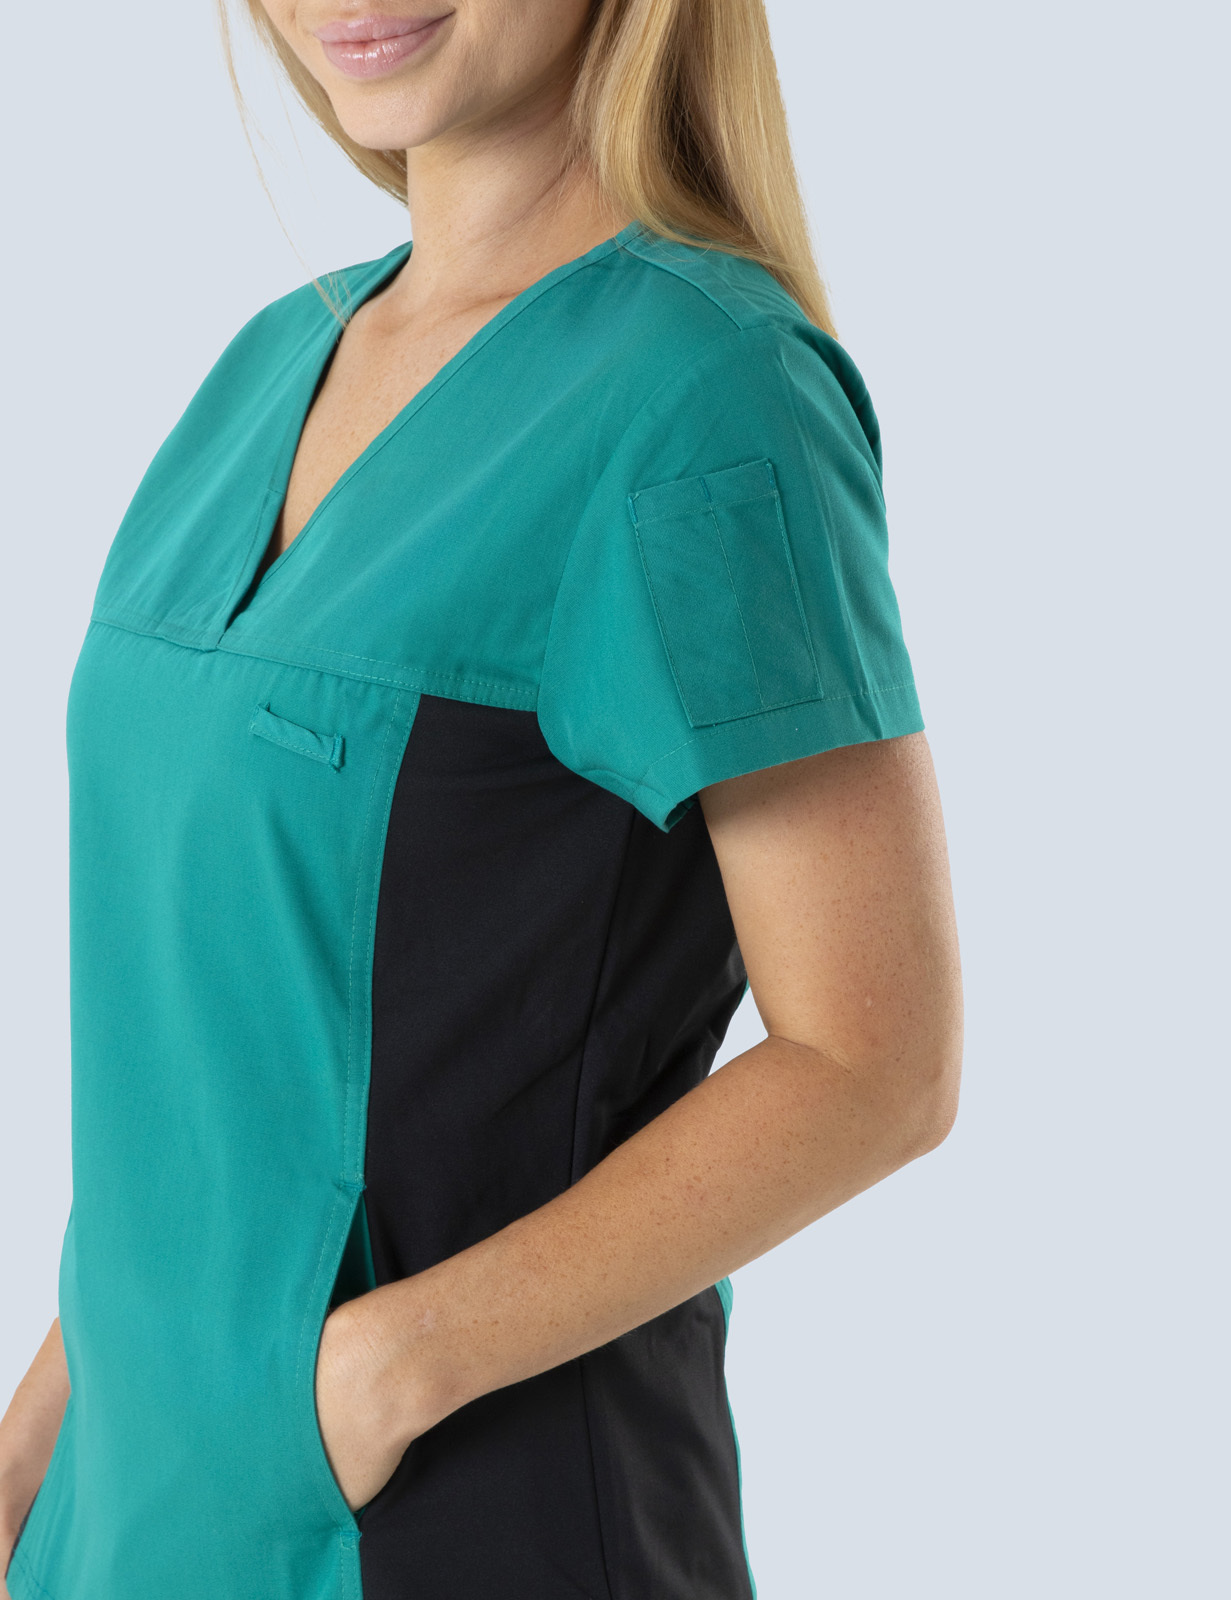 Women's Fit Solid Scrub Top With Spandex Panel - Hunter - X Large